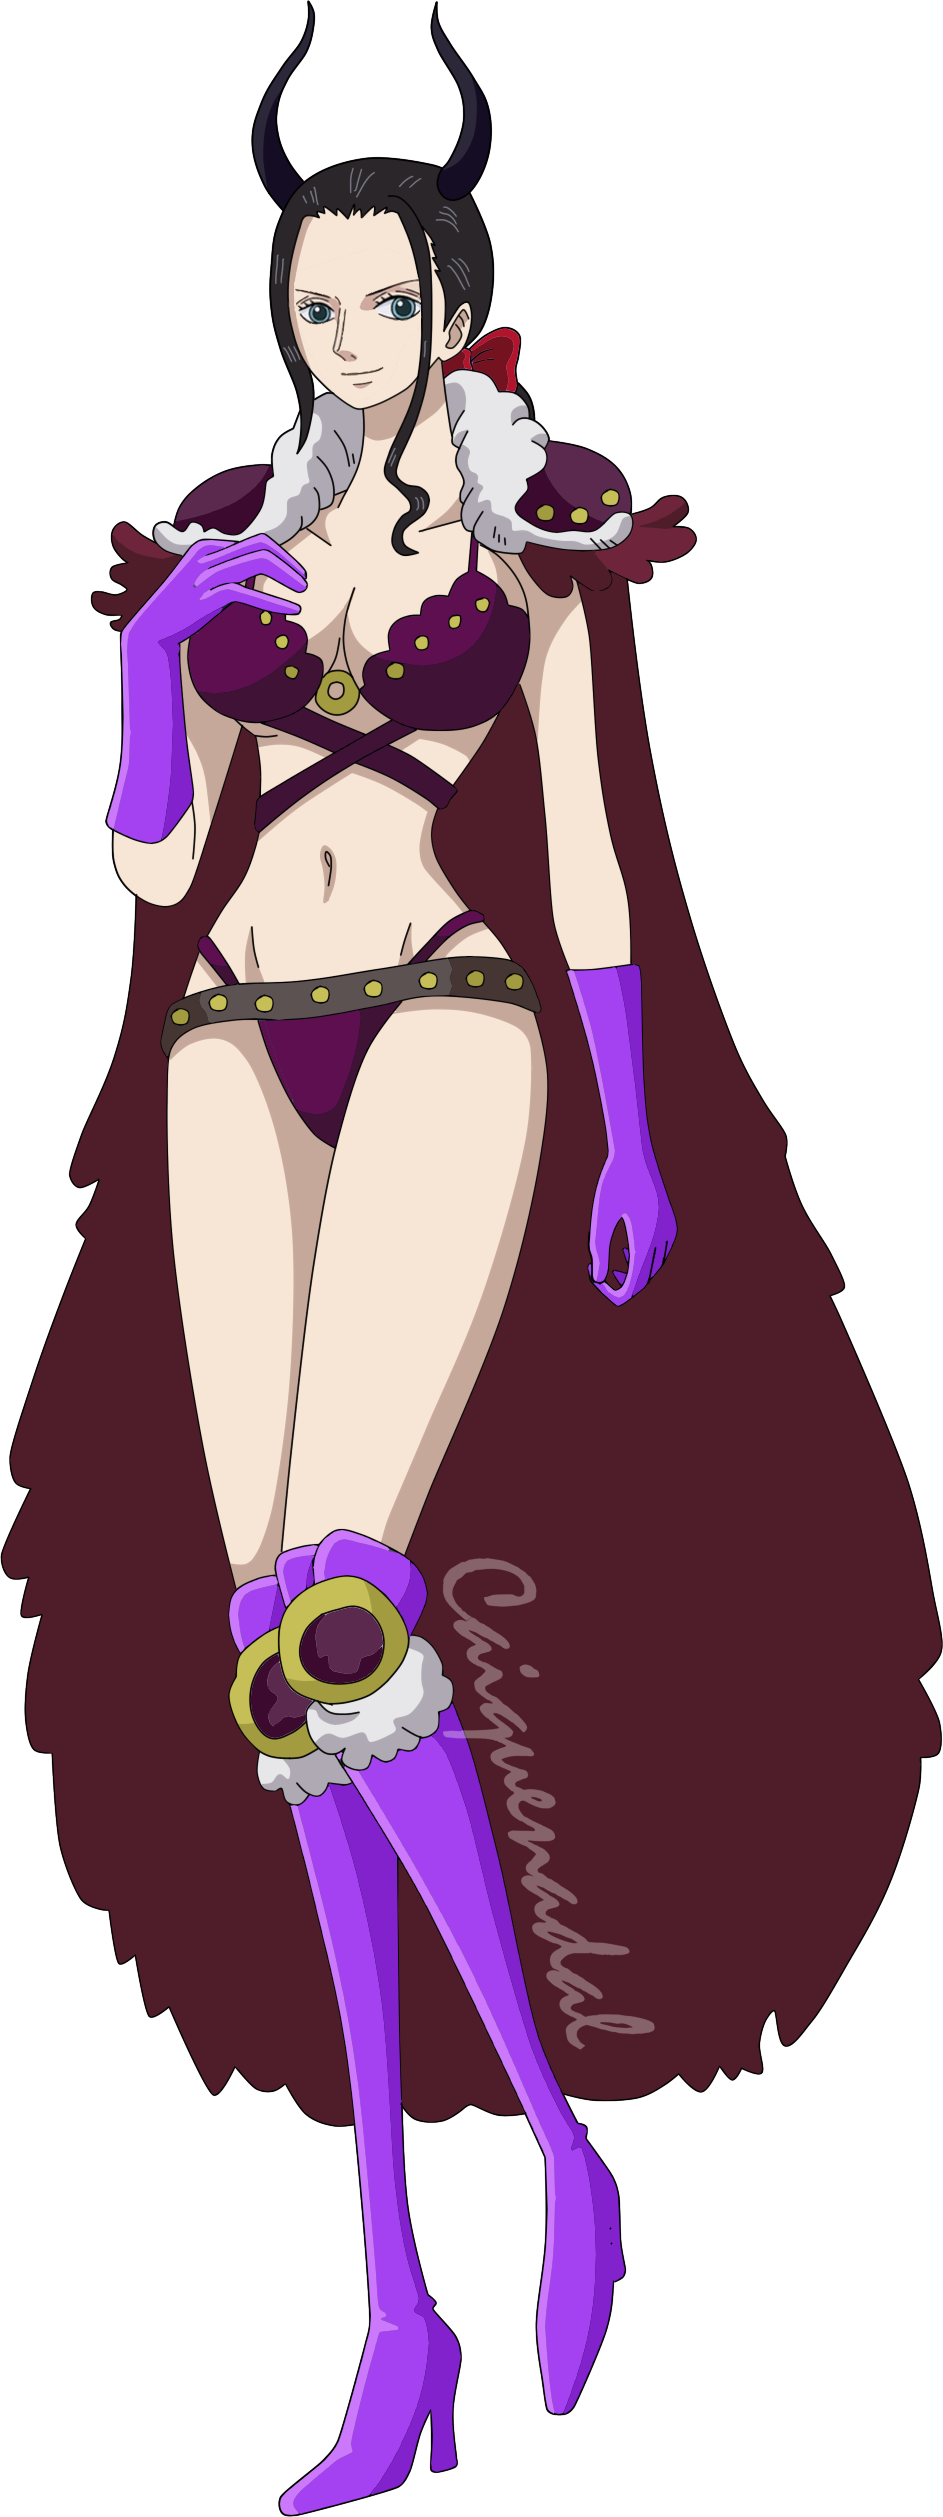 One Piece Gold Carina by WitchWandaMaximoff on DeviantArt